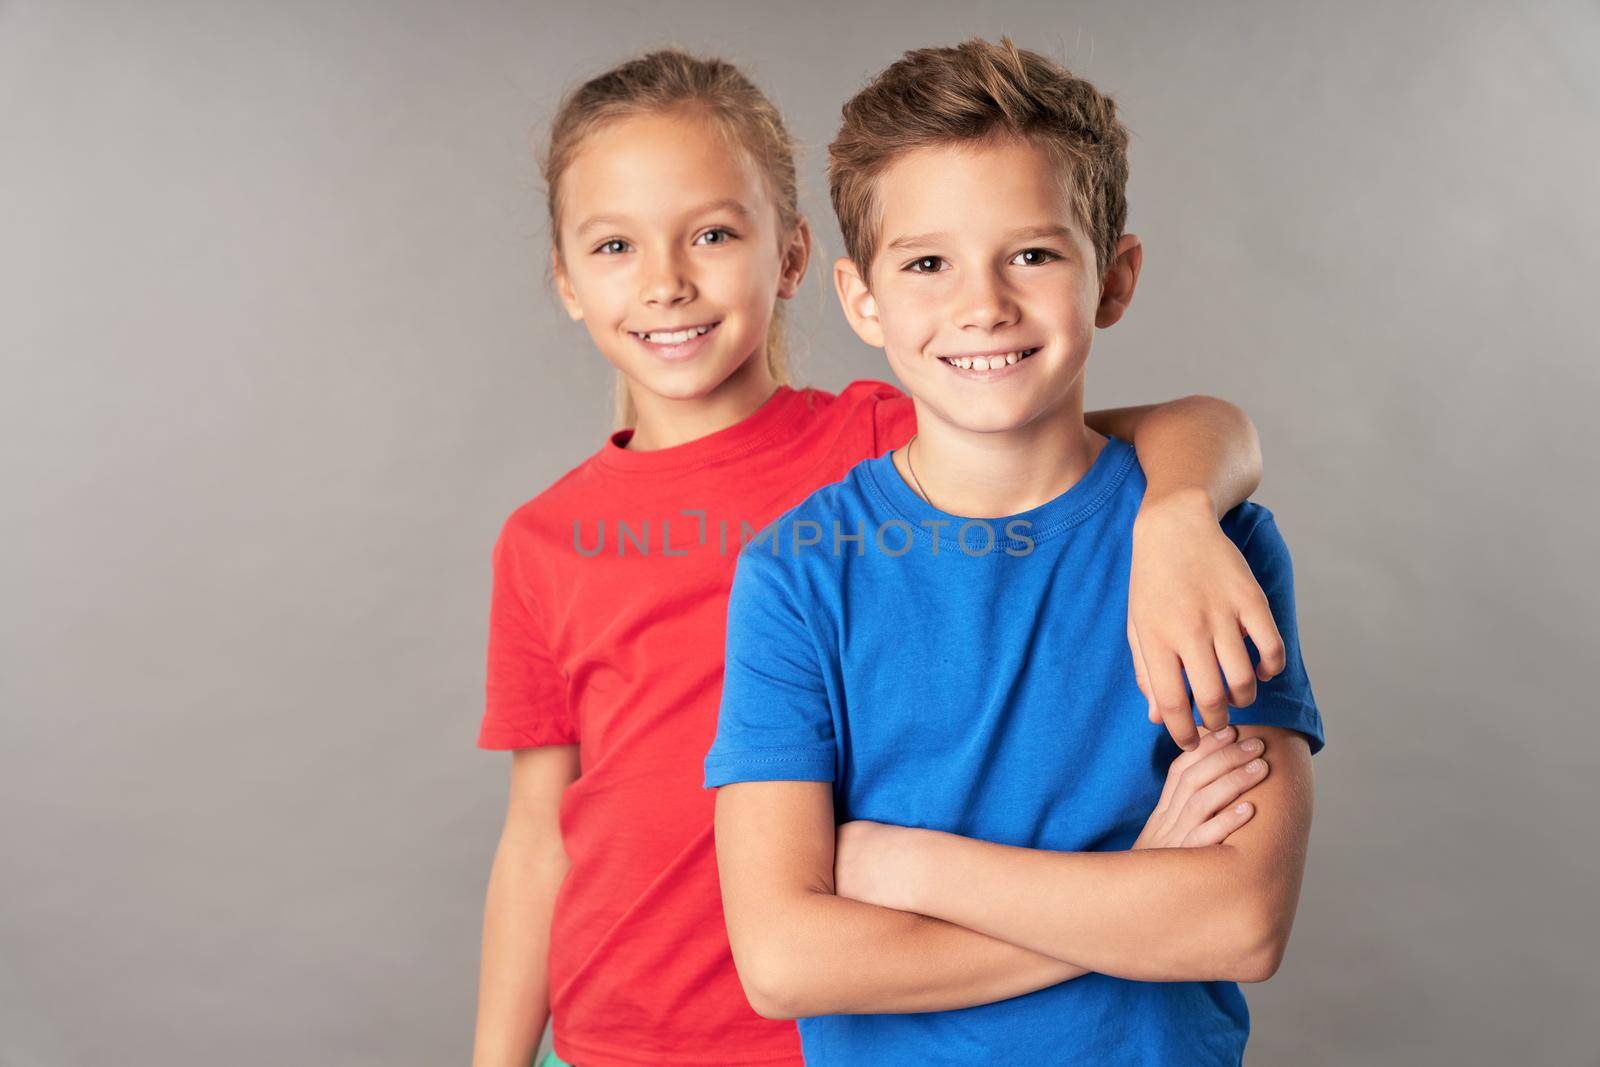 Adorable female child wrapping arm around brother shoulder and smiling while boy crossing arms over his chest